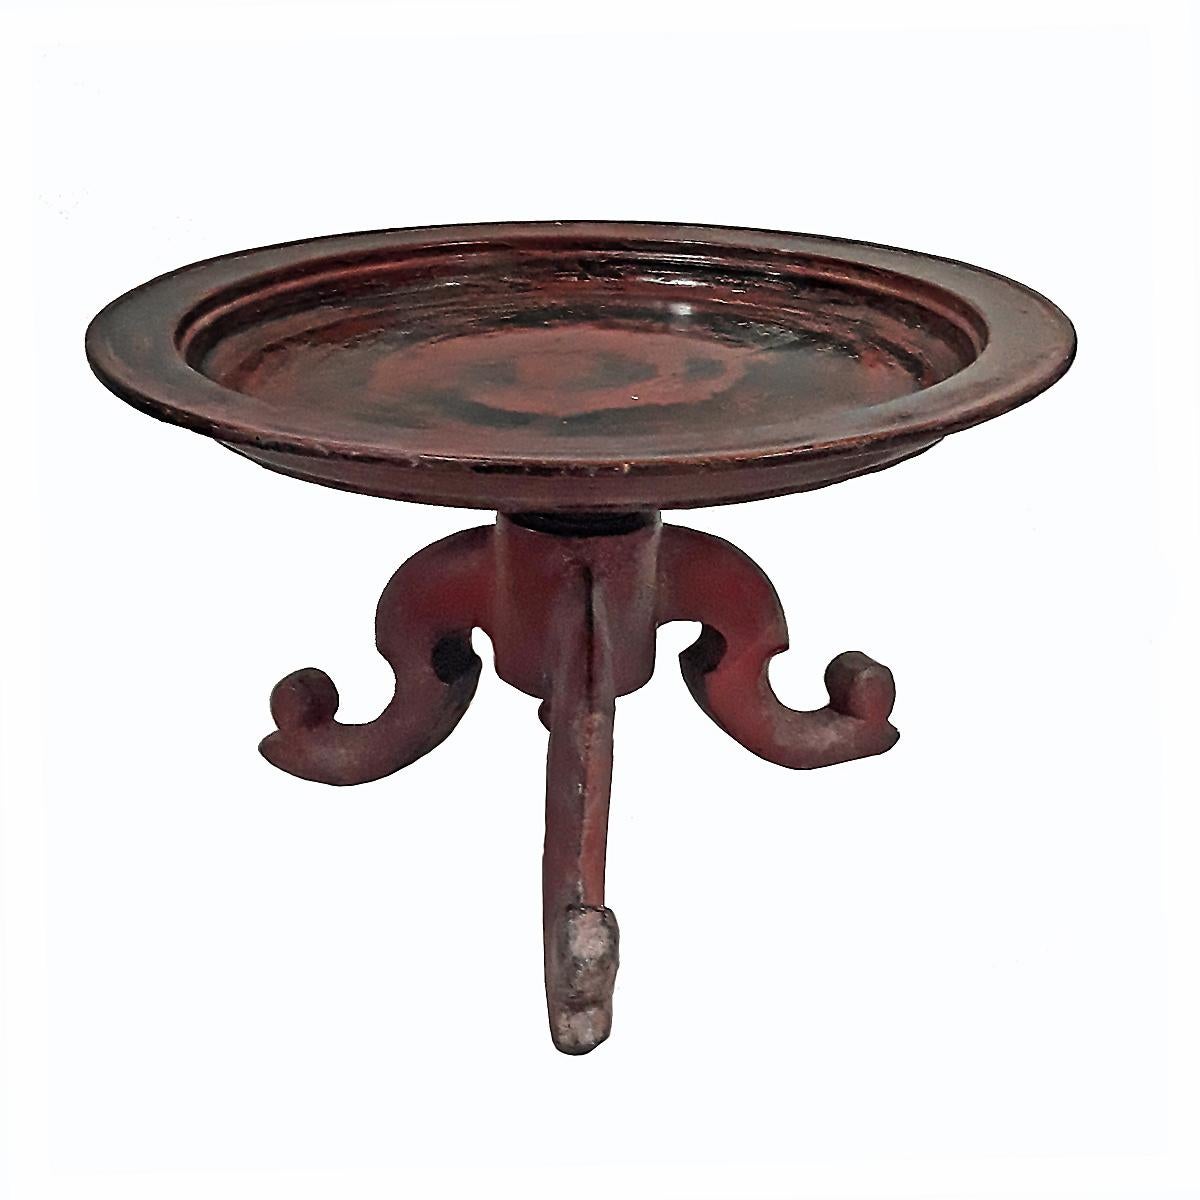 A late 19th century pedestal server / low table, hand carved in Thailand. Red and black lacquer, with a patina conferred by time.